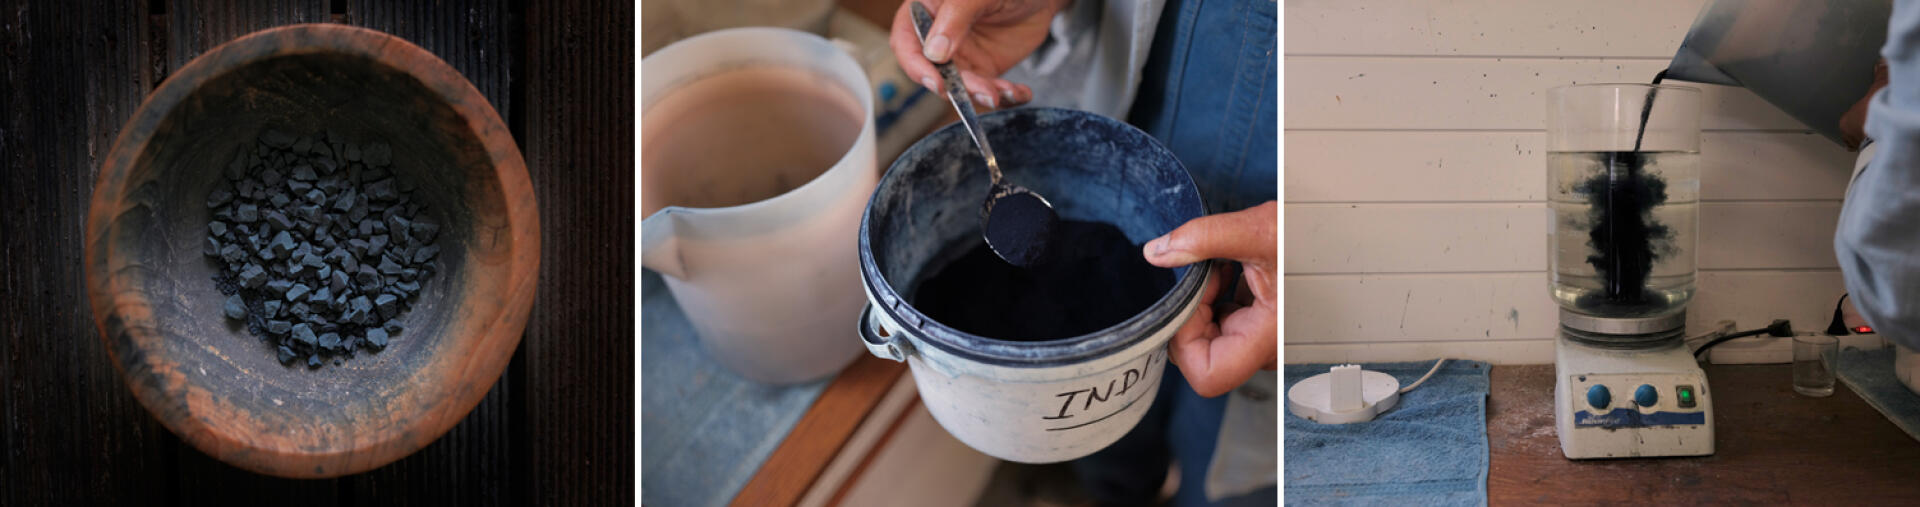 From left to right, raw pastel pigment.  To prepare the mother tank, Denise adds a little powder of natural indigo pigment to the pastel, which gives a darker color.  The contents are then poured into a beaker placed on a heated magnetic stirrer.